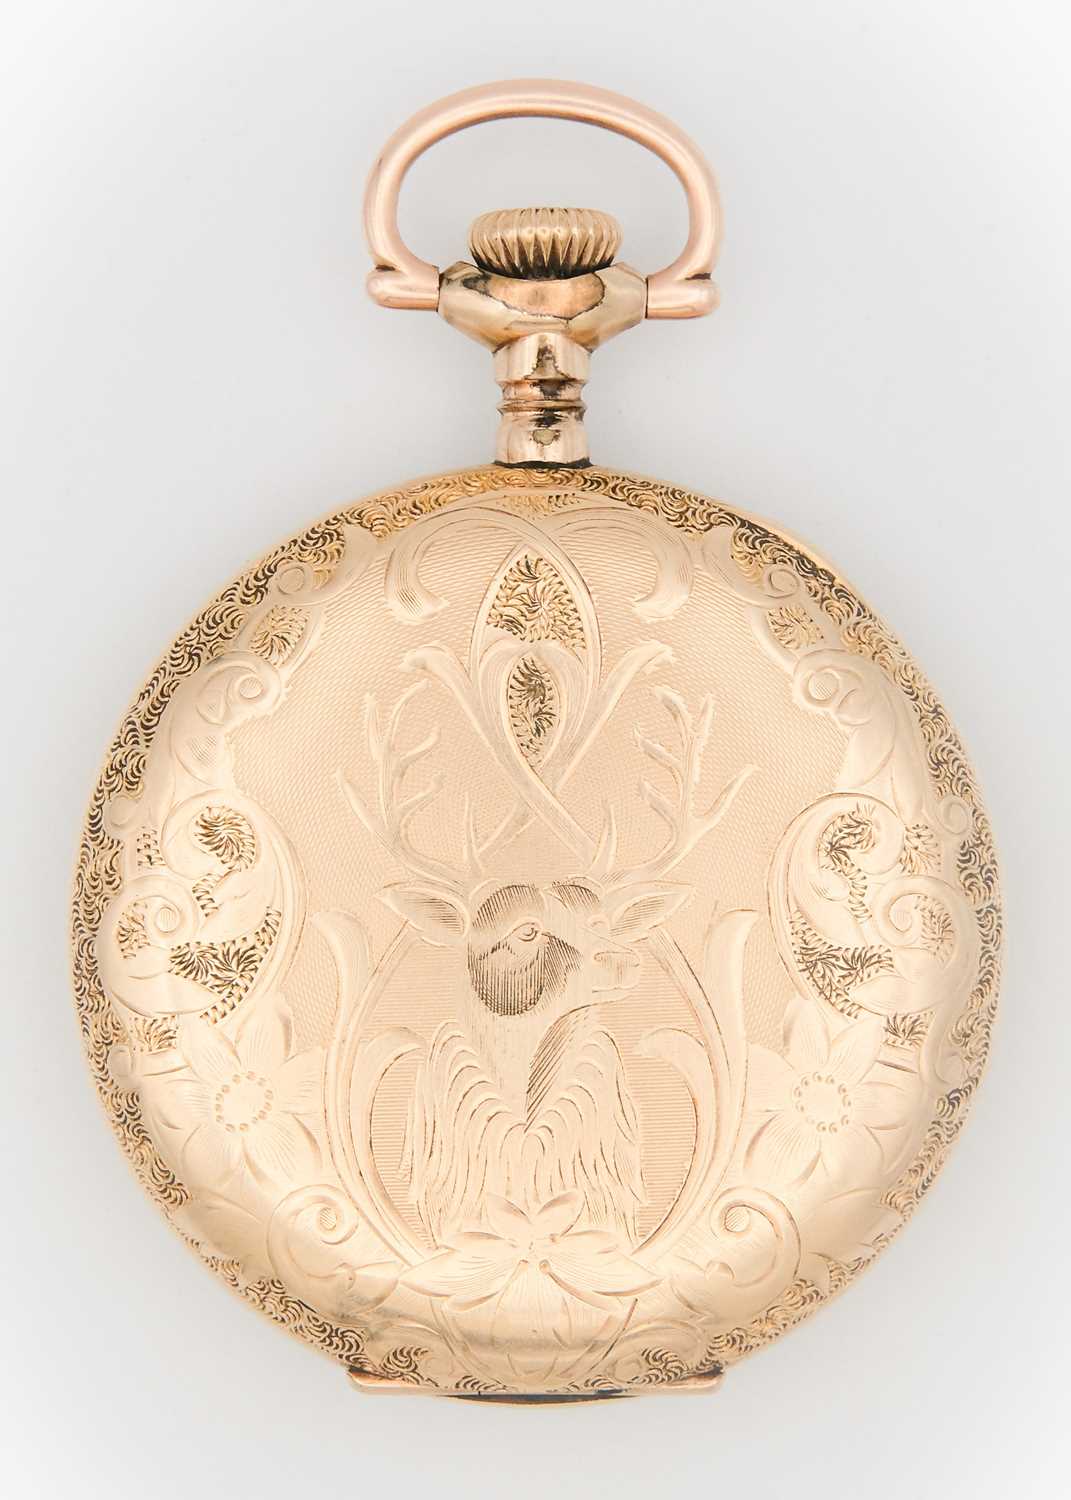 WALTHAM - A gold-plated full hunter crown wind lever pocket watch. - Image 3 of 4